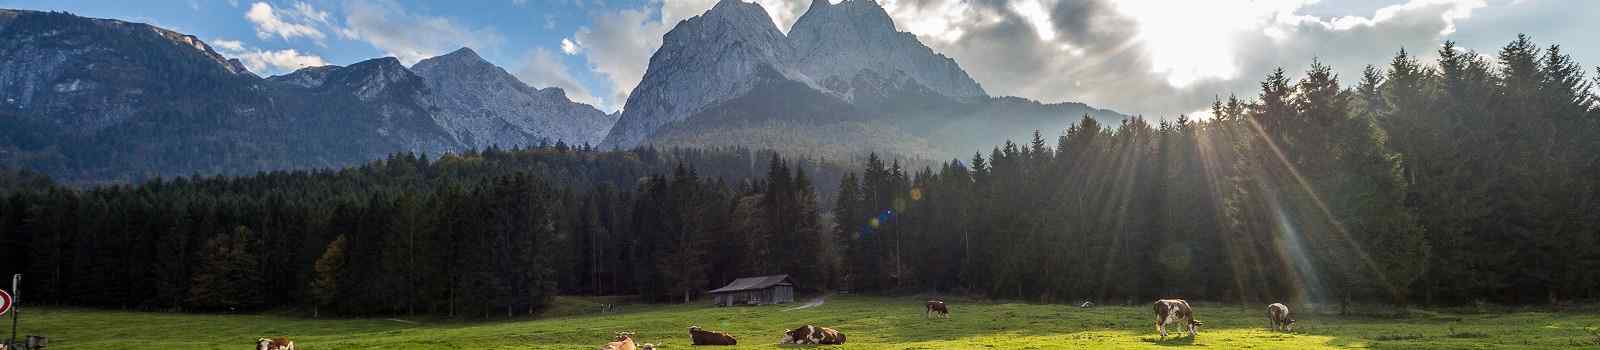 ALPENJUWELEN  Group of cows on a pasture in the Alps near Zugspitze shutterstock 493794661